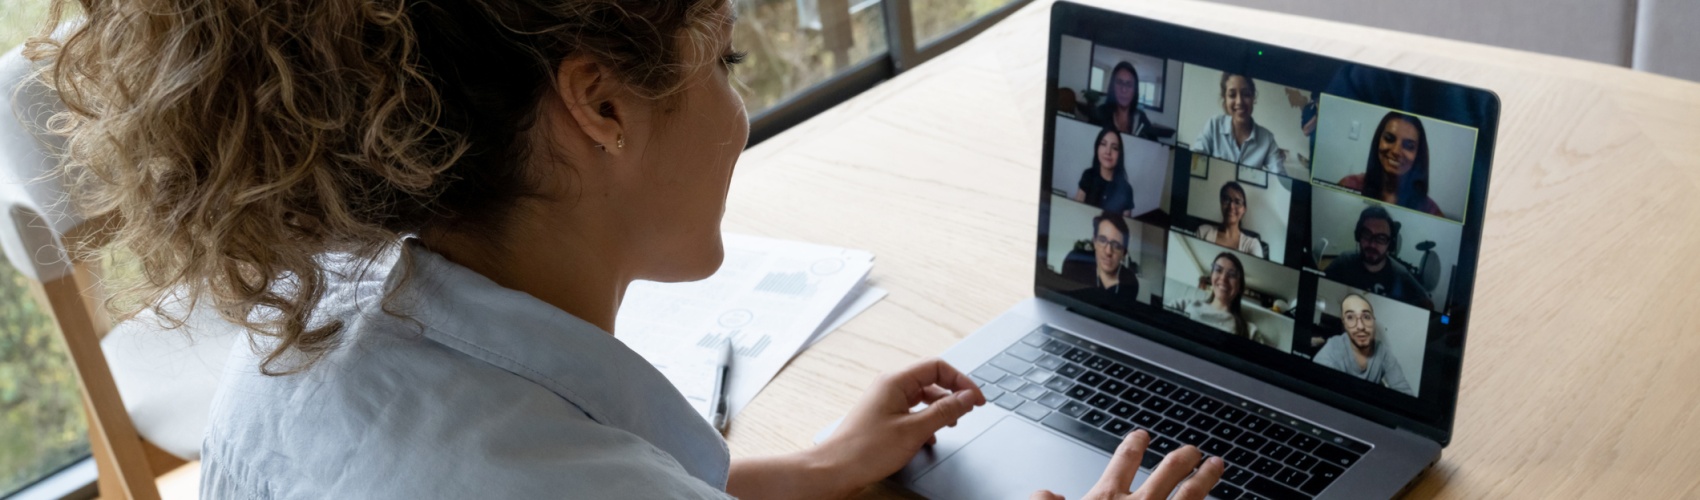 Woman in a video conference with her coworkers while working from home